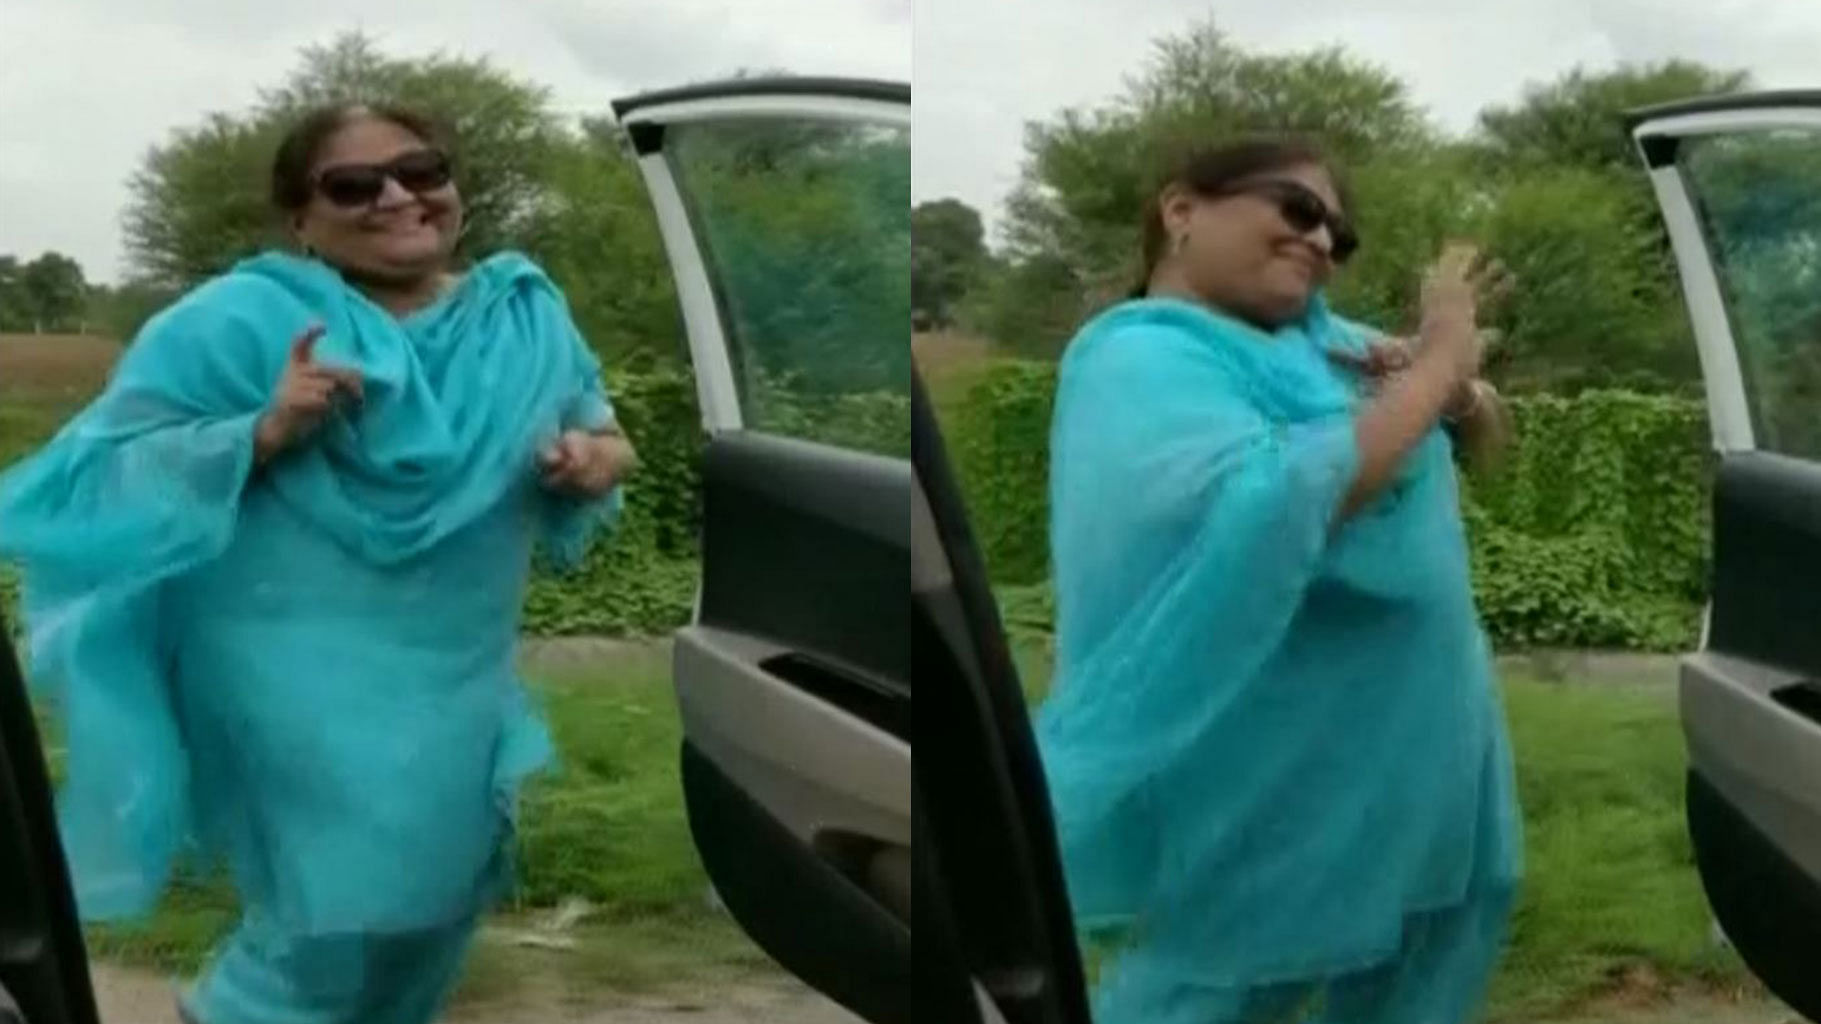 Woman from Vadodara takes up the Kiki challenges even as the Vadodara police issues an advisory against it